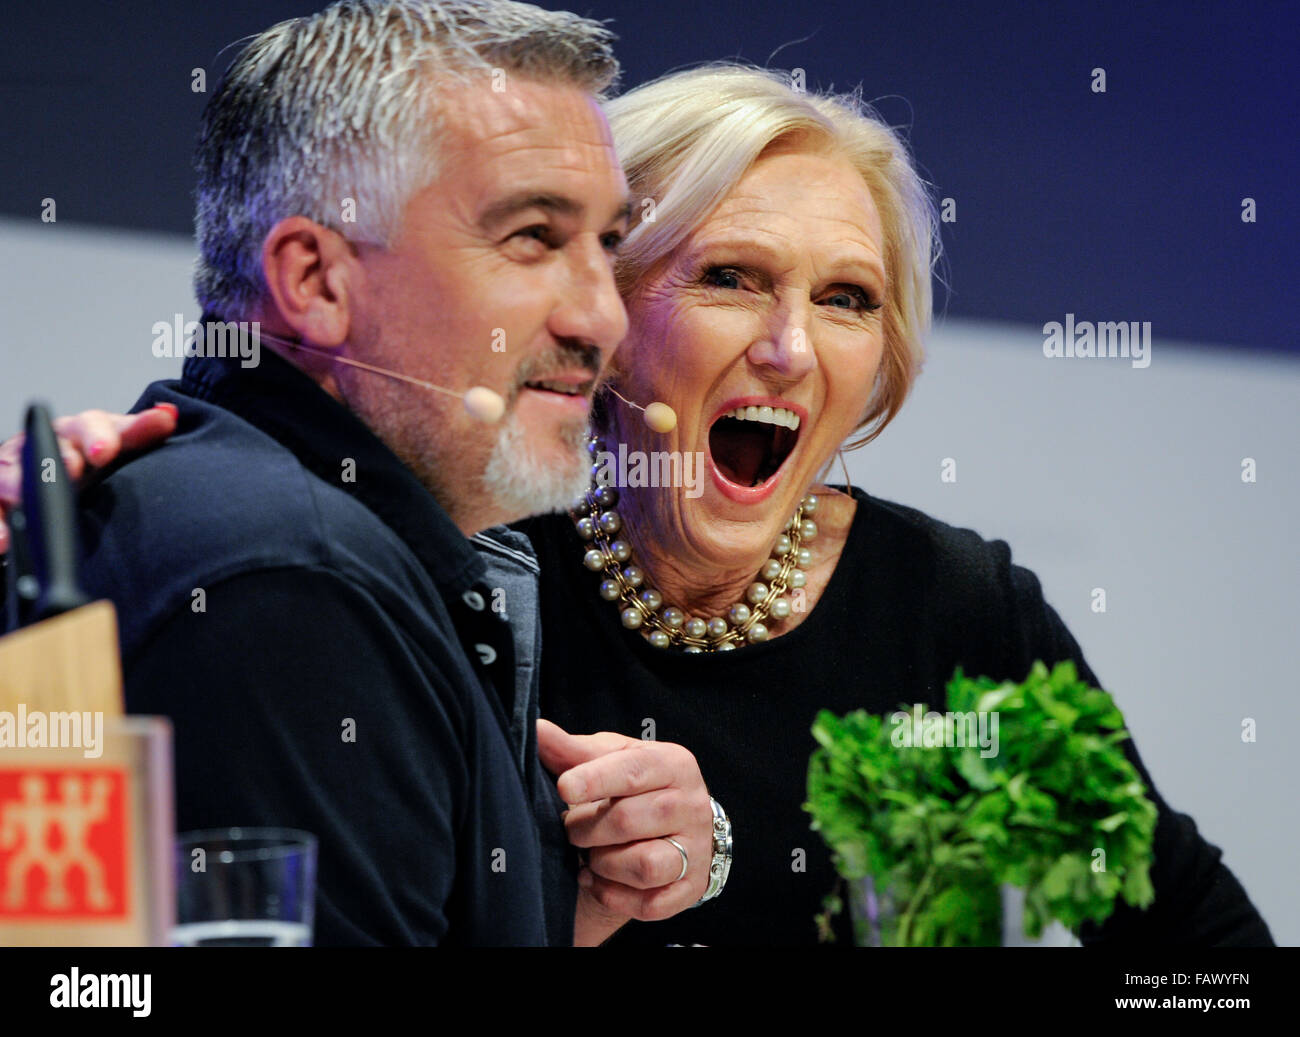 Paul Hollywood and Mary Berry do a live demonstration in the Supertheatre at the BBC Good Food Show Winter at the Birmingham NEC  Featuring: Mary Berry, Paul Hollywood Where: Birmingham, United Kingdom When: 27 Nov 2015 Stock Photo